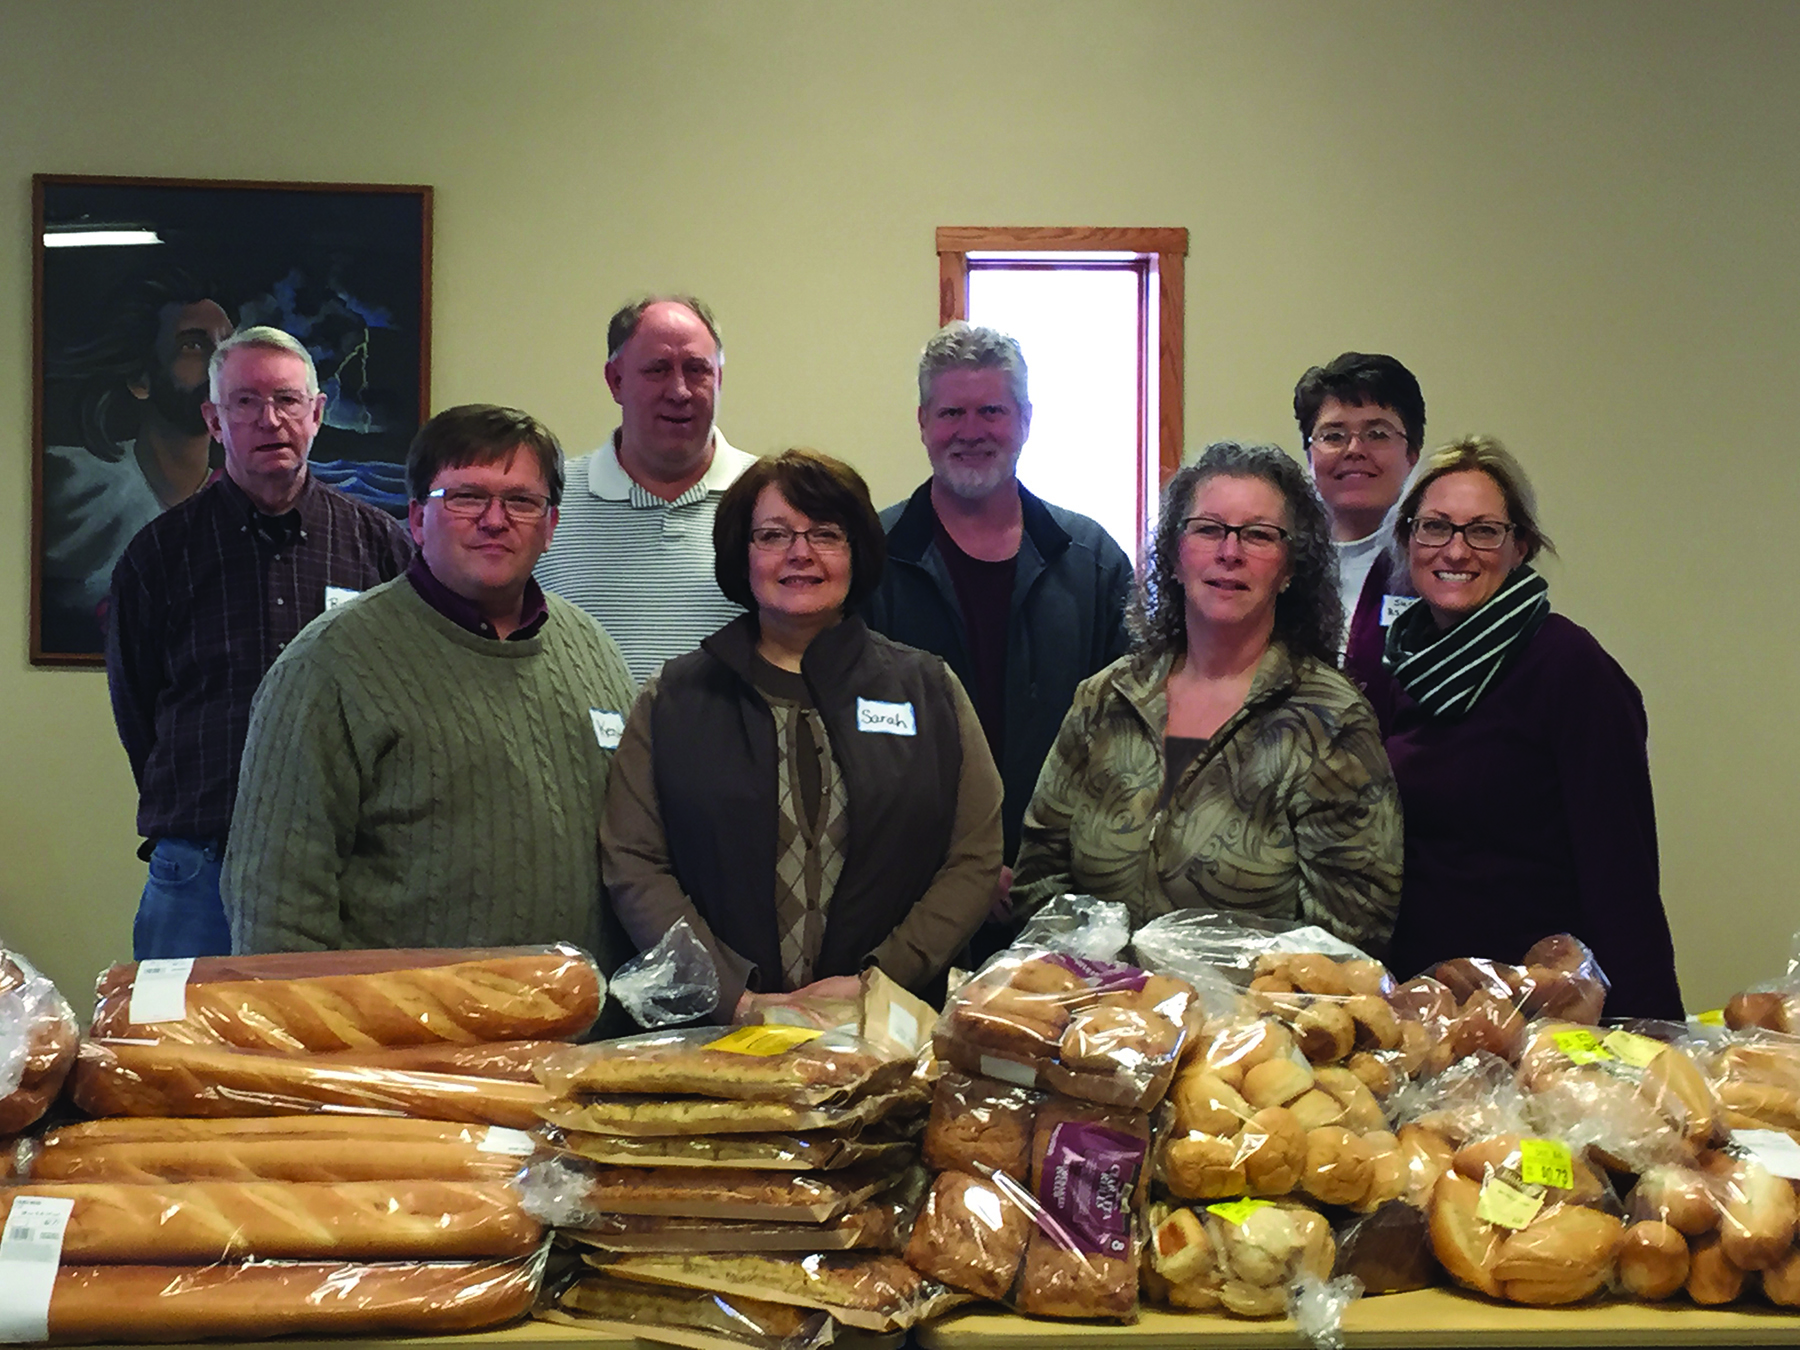 Church member and community volunteers assisting with the mobile pantry are: (front row l-r) Kent Dunwoody, Sarah Dunwoody, Marcia Hemmers, Erin Pingel, (back row) Richard Schwarz, Jeff Johnson, Mark White and Sue Ahlers. Photo courtesy Erin Pingel.